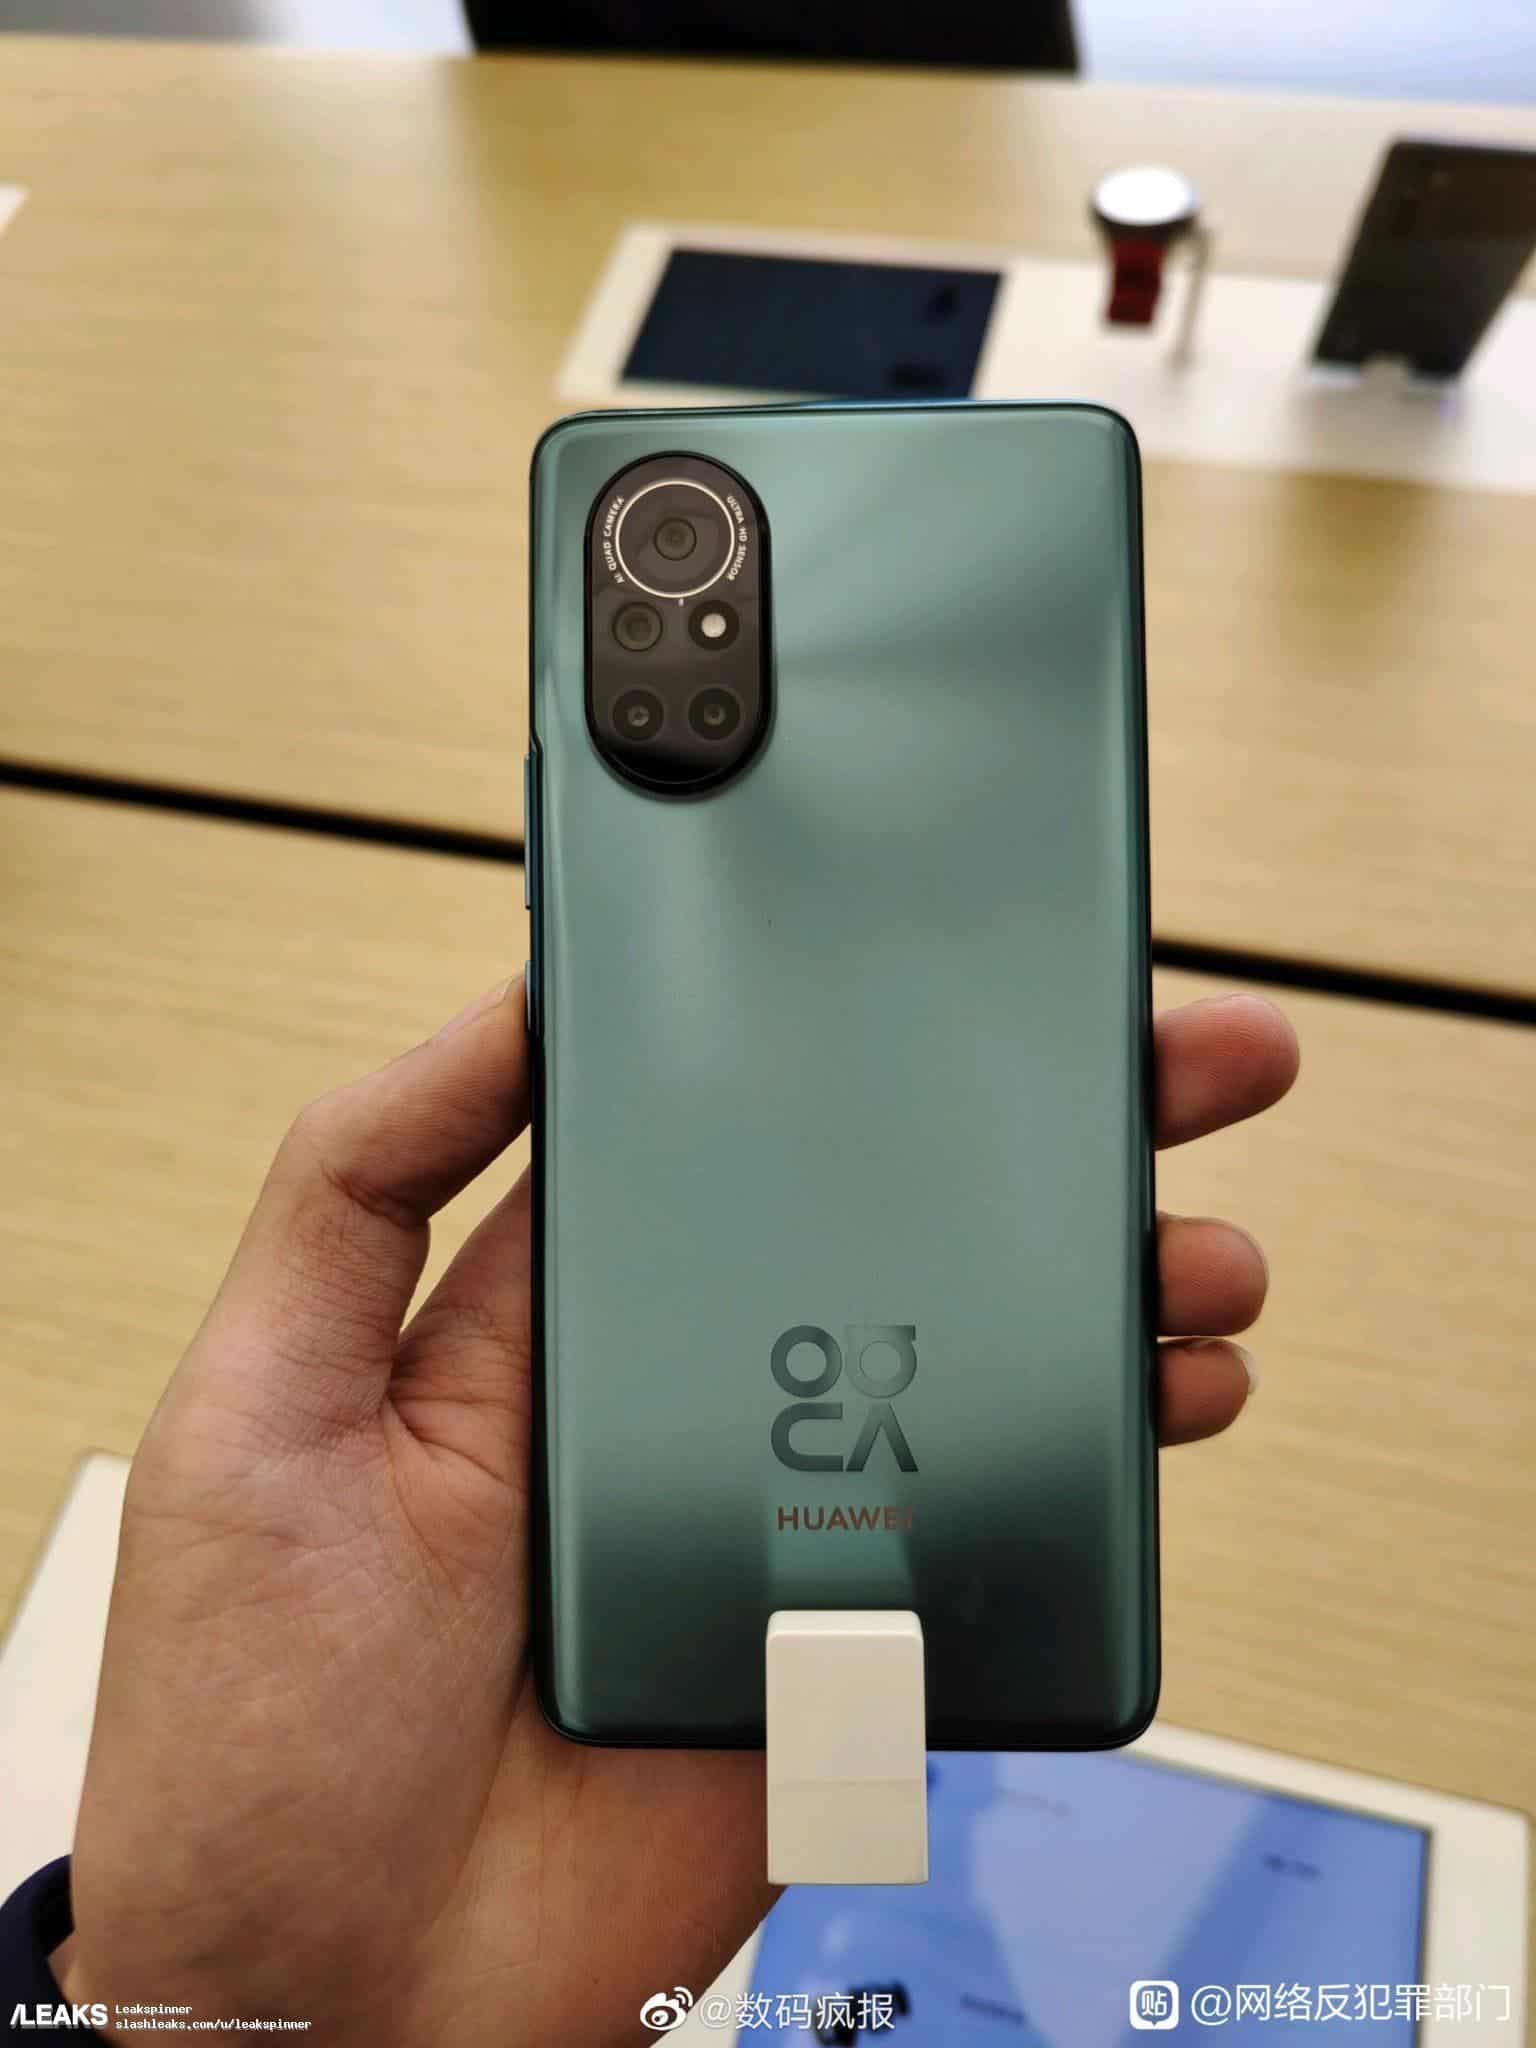 Chinese Tipster Leaks the Specifications of the Huawei Nova 8 and Huawei Nova 8 Pro Smartphones